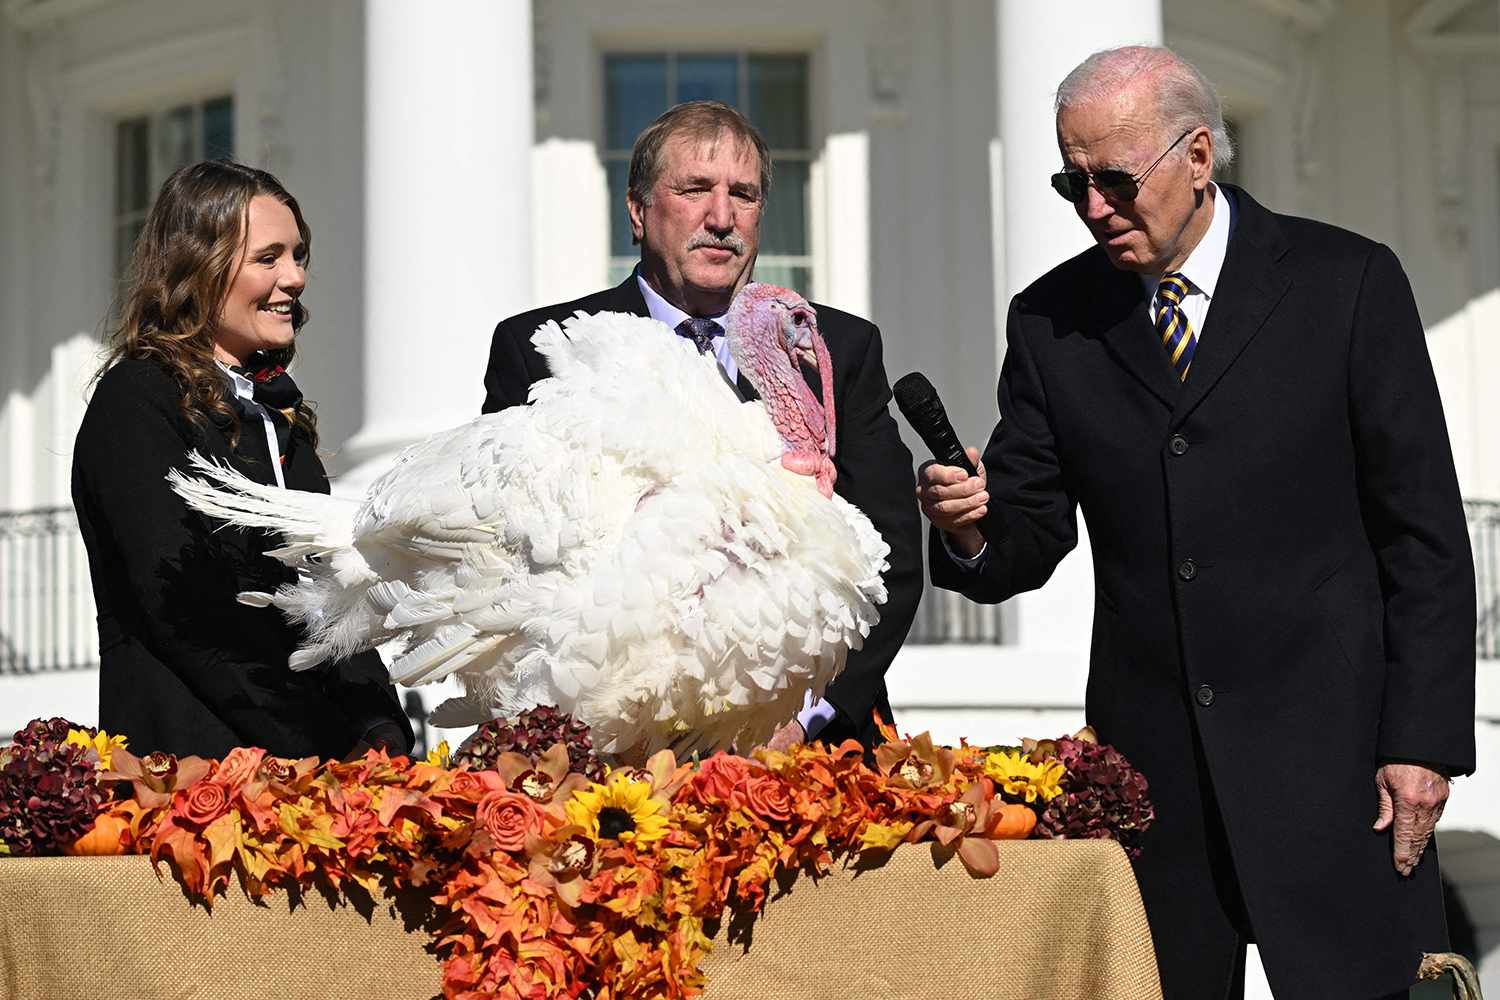 US President Joe Biden pardons Chocolate, the National Thanksgiving Turkey, as he is joined by the National Turkey Federation Chairman Ronnie Parker (C) on the South Lawn of the White House in Washington, DC on November 21, 2022.